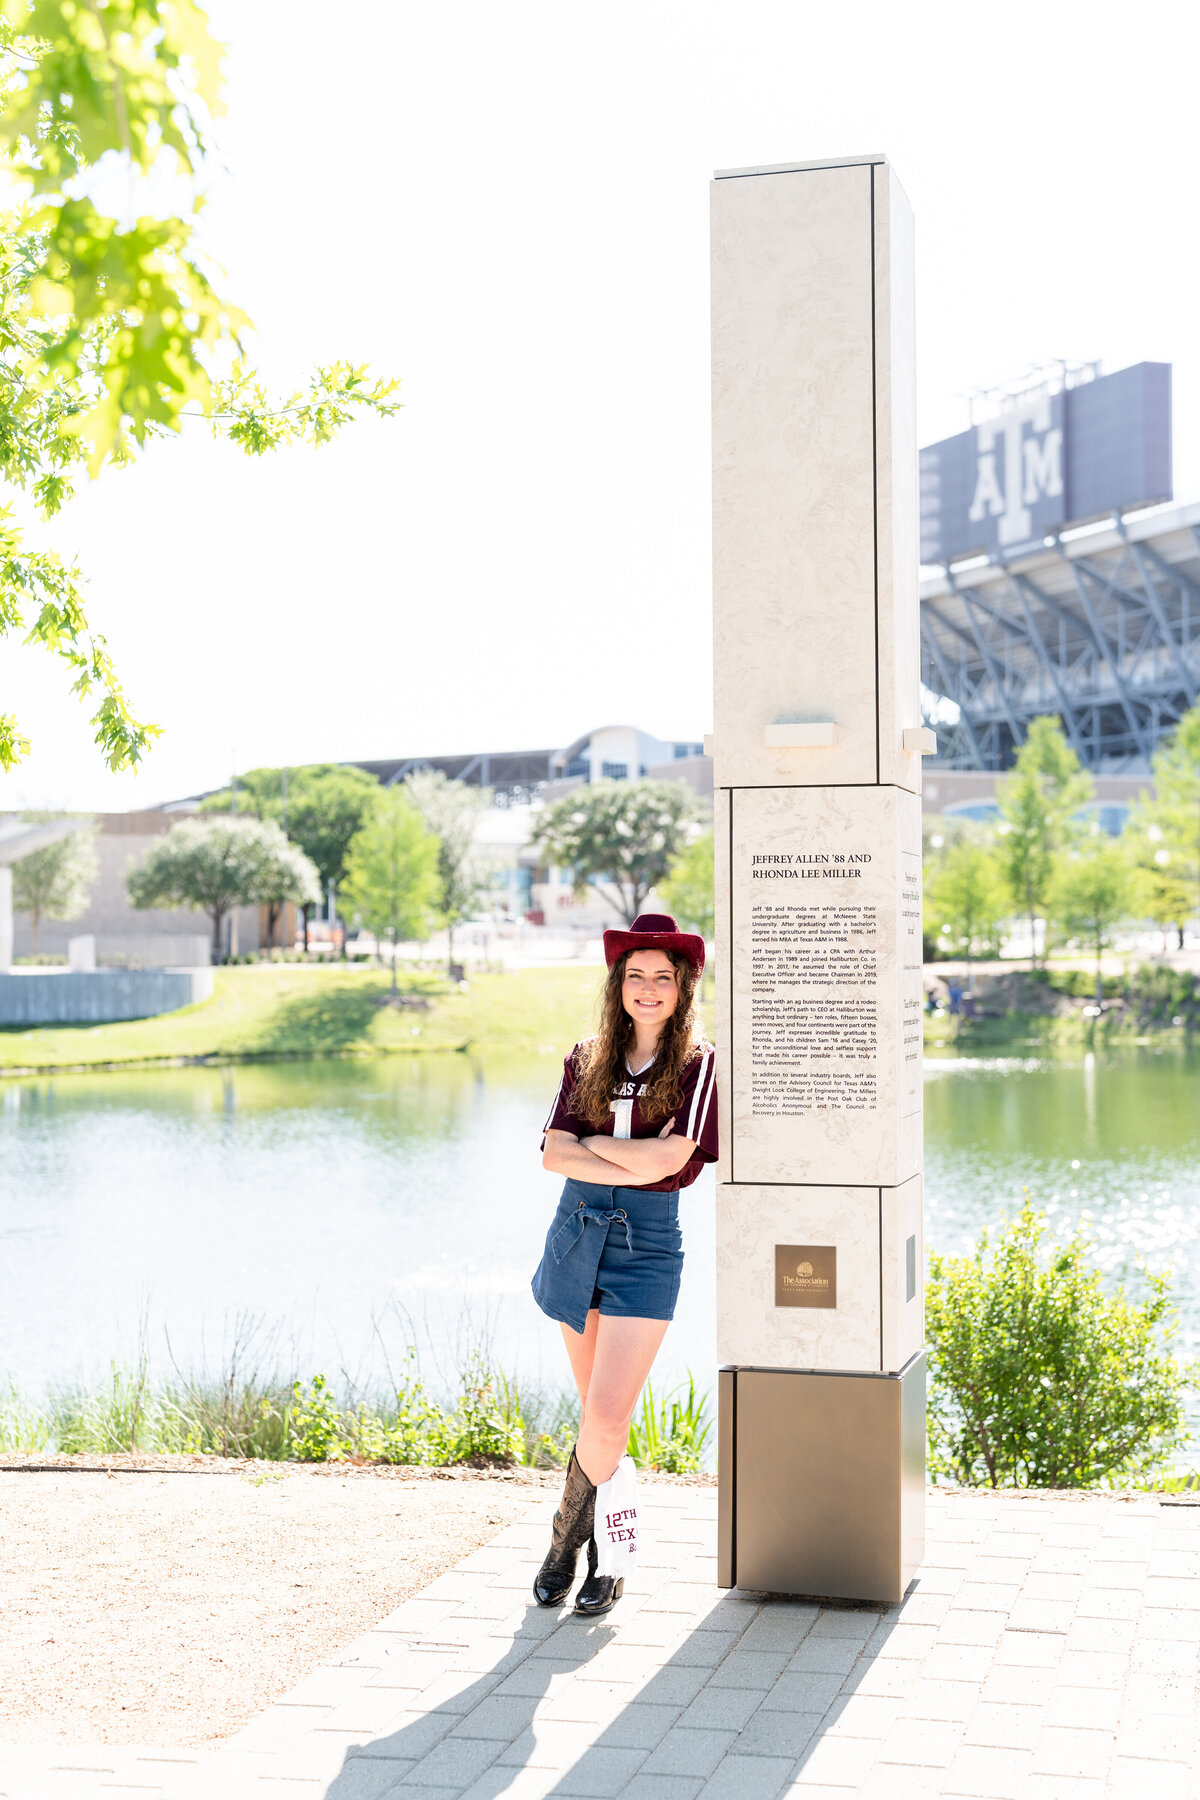 Texas A&M senior girl leaning against column in Aggie Park with Kyle Field in background while wearing Aggie jersey, maroon cowboy hat and jean skirt